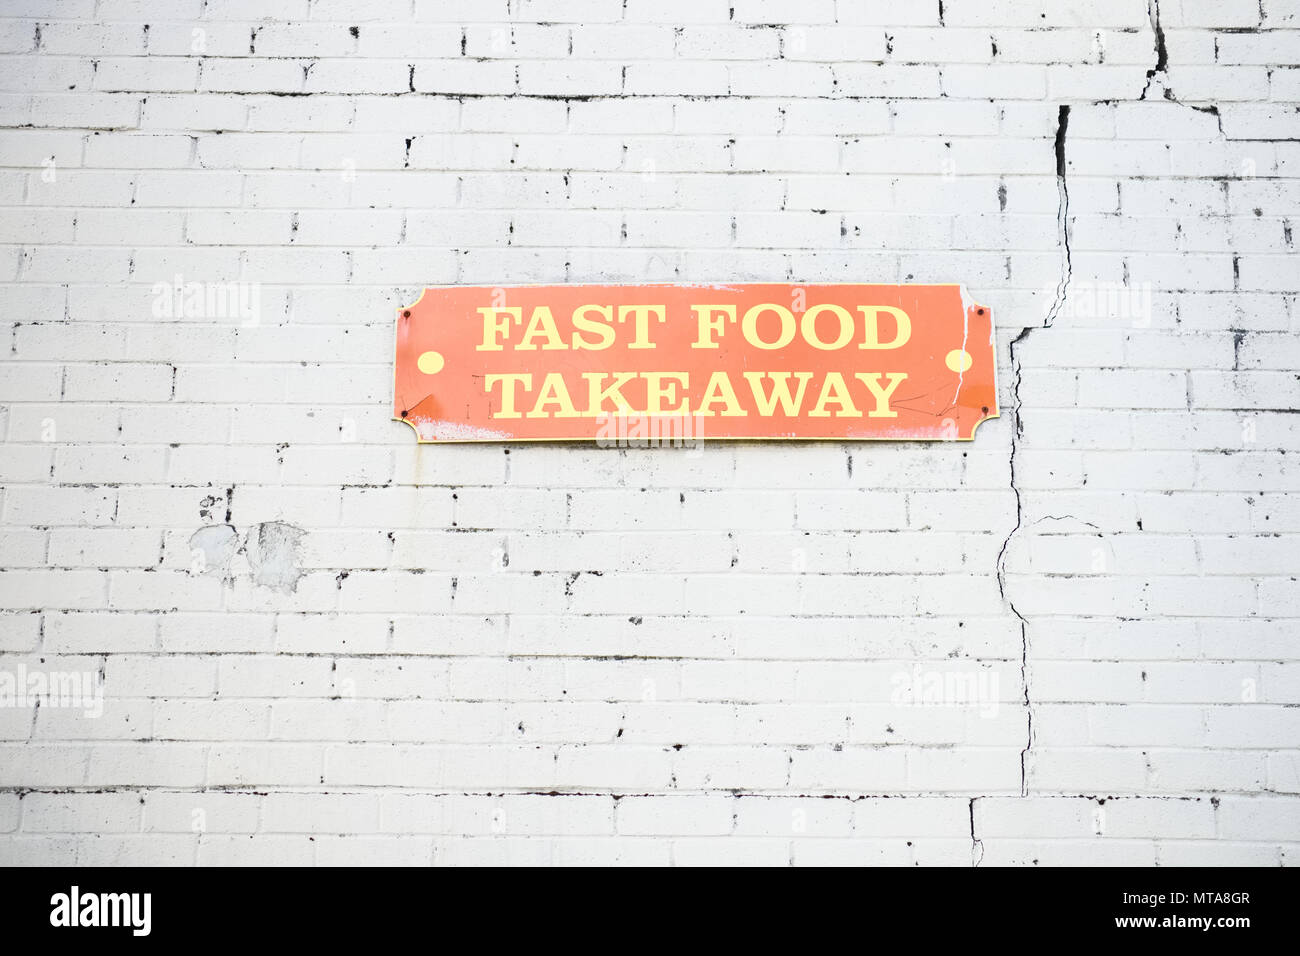 fast food takeaway sign on wall white brick background orange signage fast food takeaway sign on wall white brick background orange signage Stock Photo